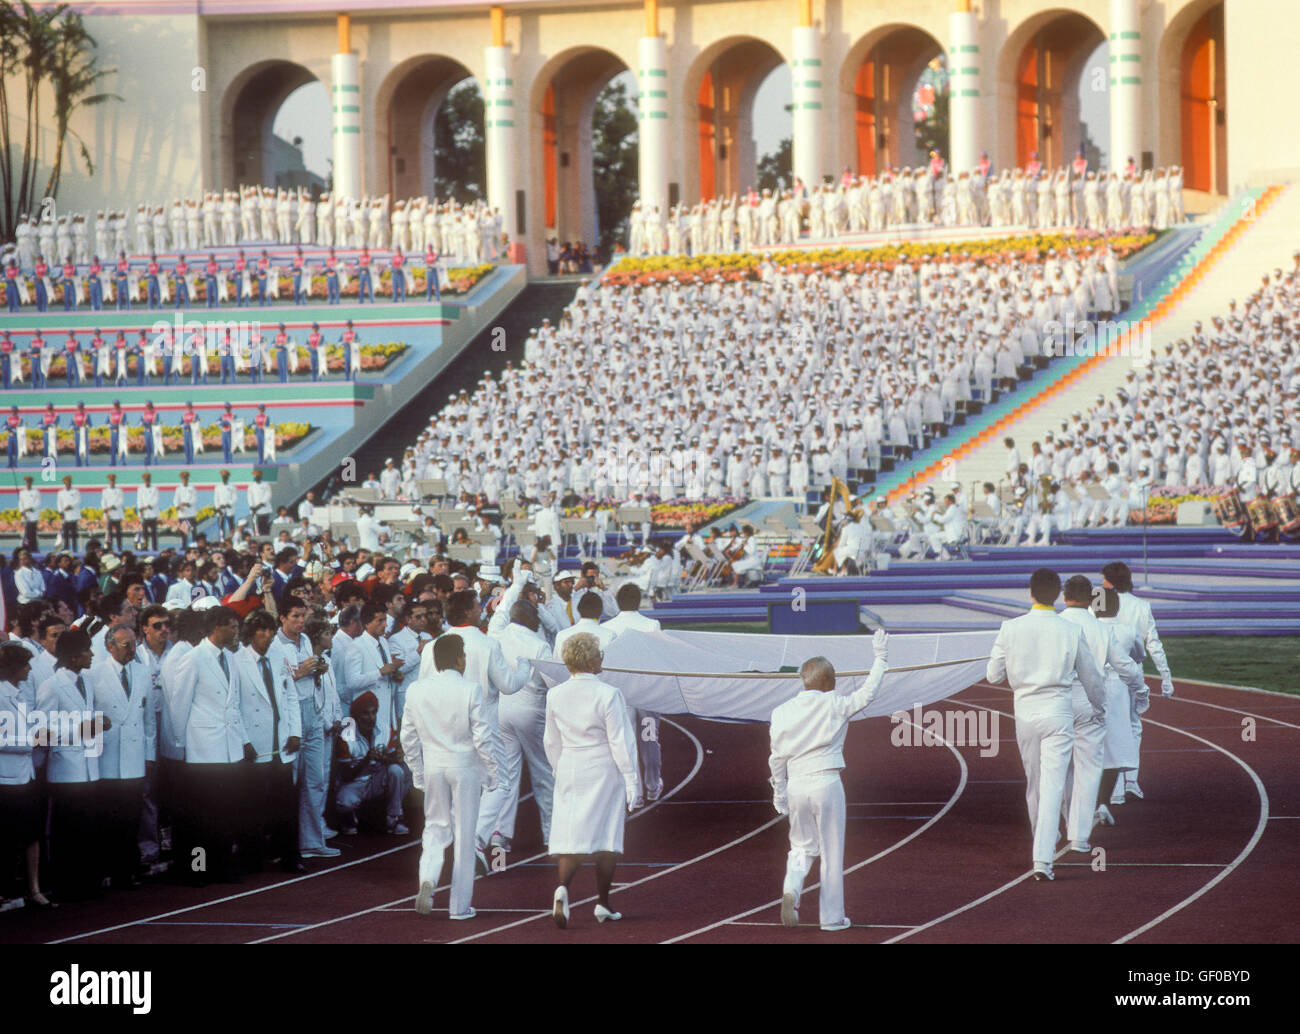 Olympic medalists carry and escort the Olympic flag in the Opening Ceremonies of the 1984 Olympic Games in Los Angeles. Stock Photo